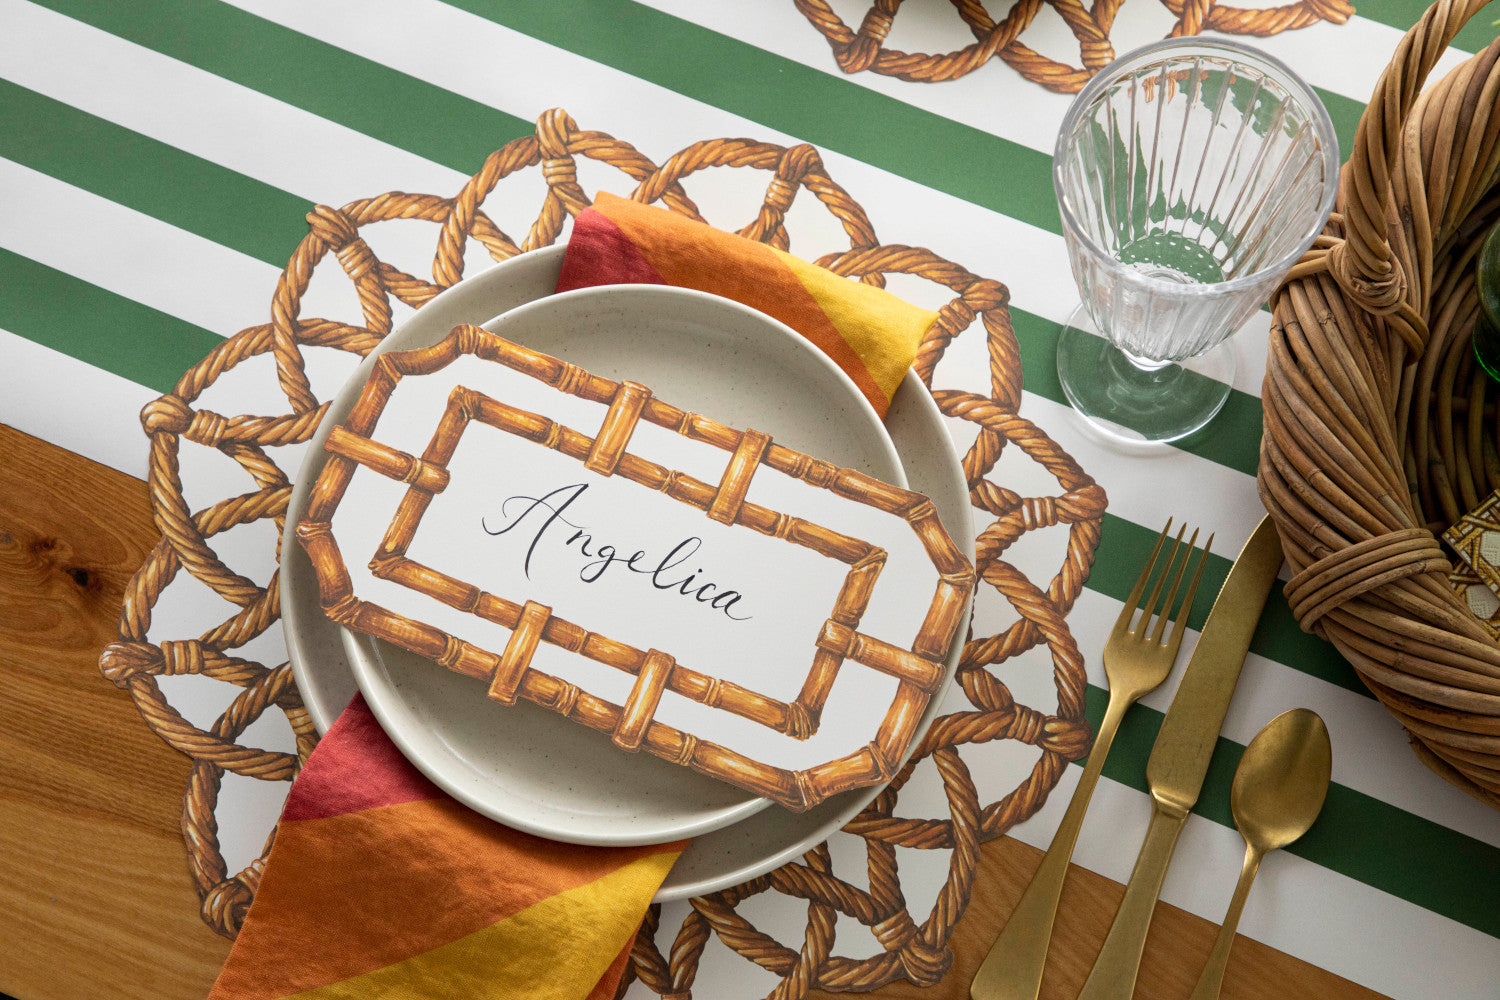 The Die-cut Rattan Weave Placemat under an elegant table setting.